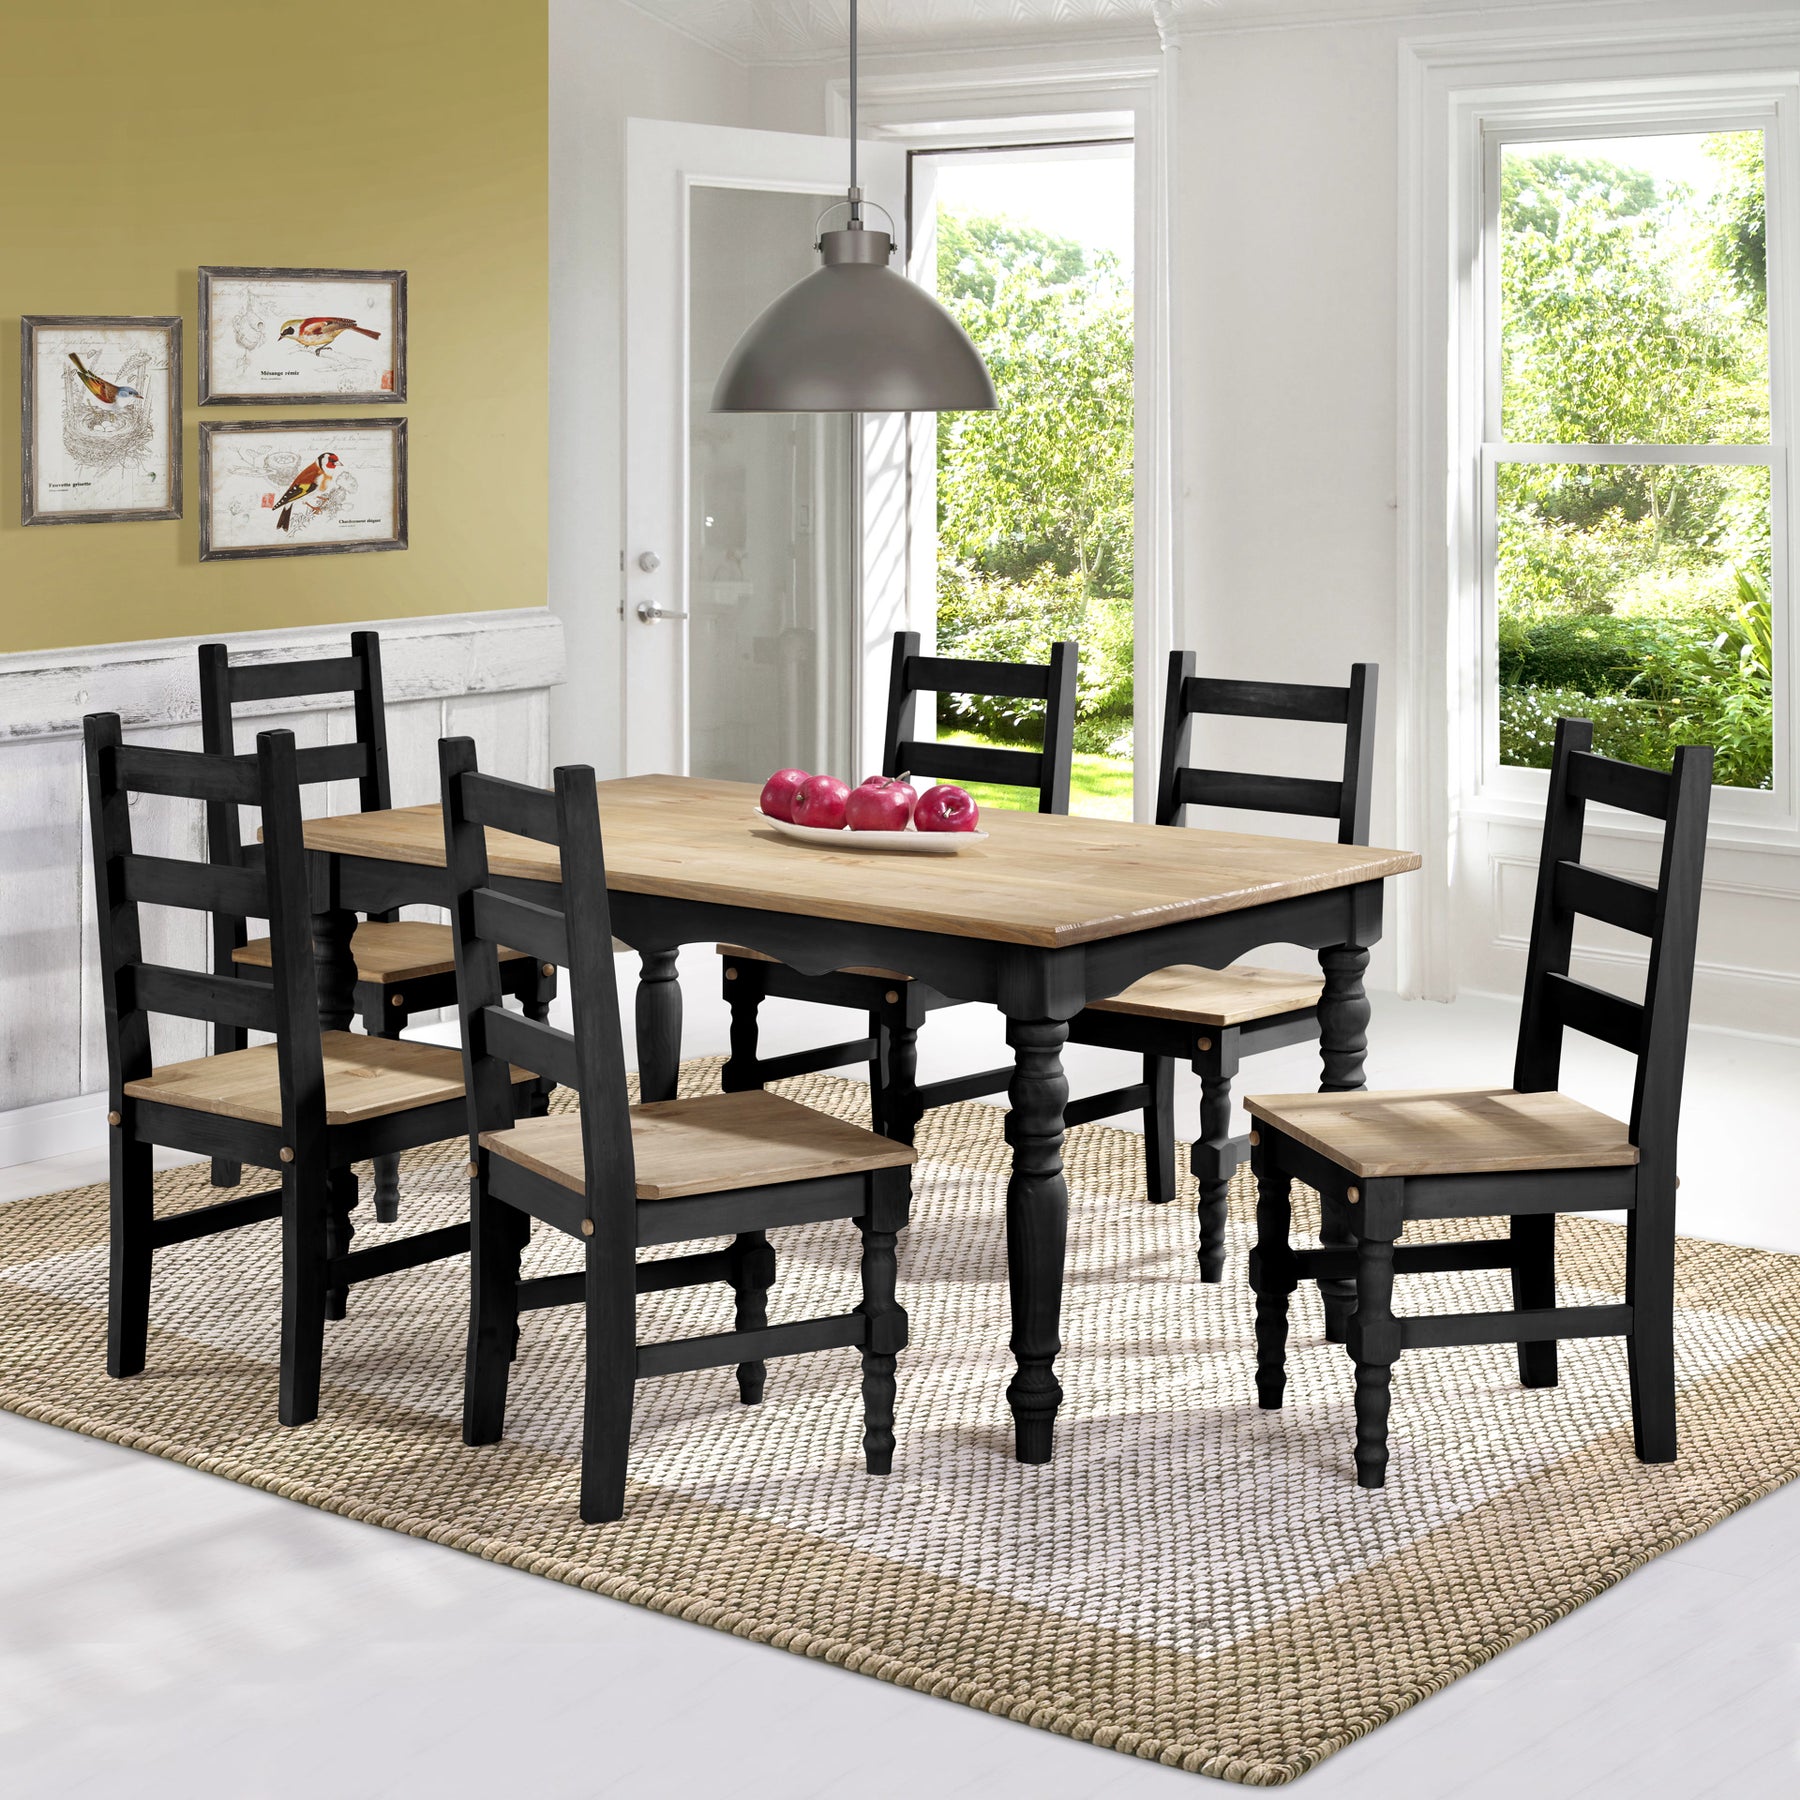 Manhattan Comfort Jay 7-Piece Solid Wood Dining Set with 6 Chairs and 1 Table in Black Wash-Minimal & Modern